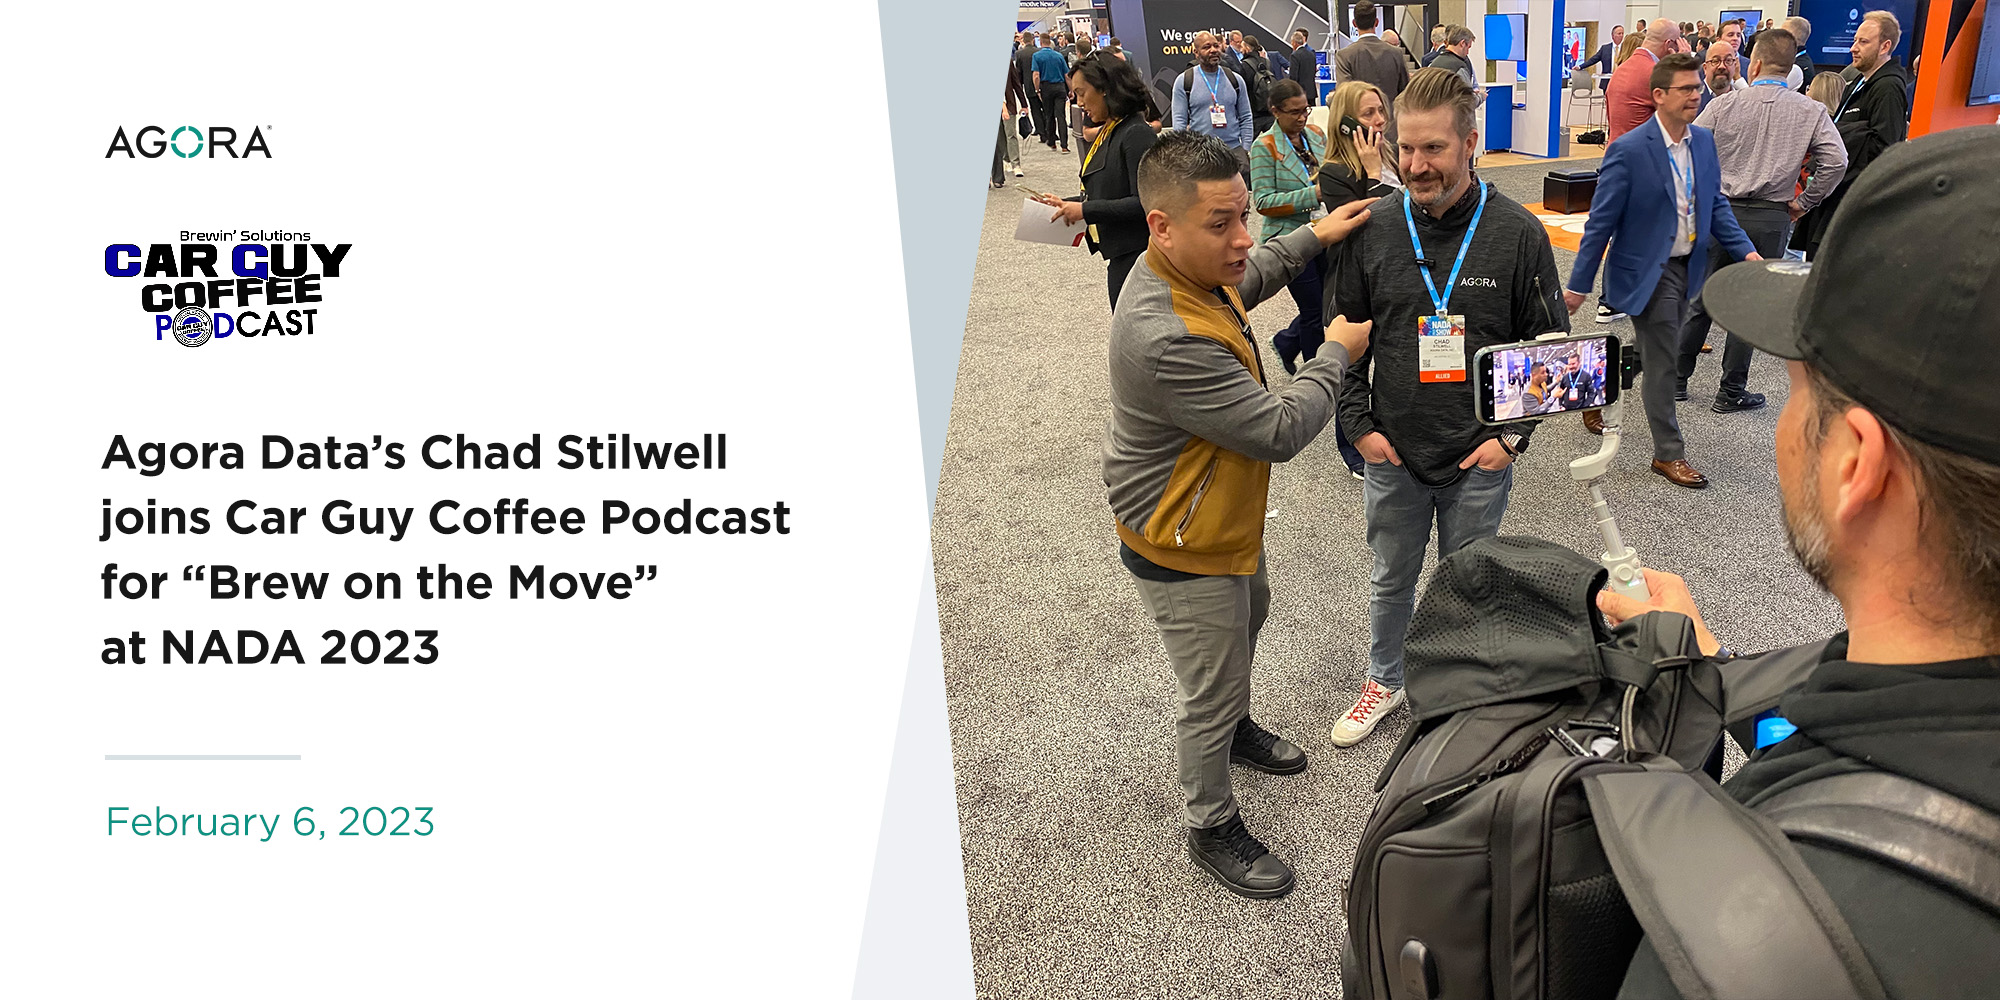 Agora Data's Chad Stilwell joins Car Guy Coffee Podcast for "Brew on the Move" at NADA 2023